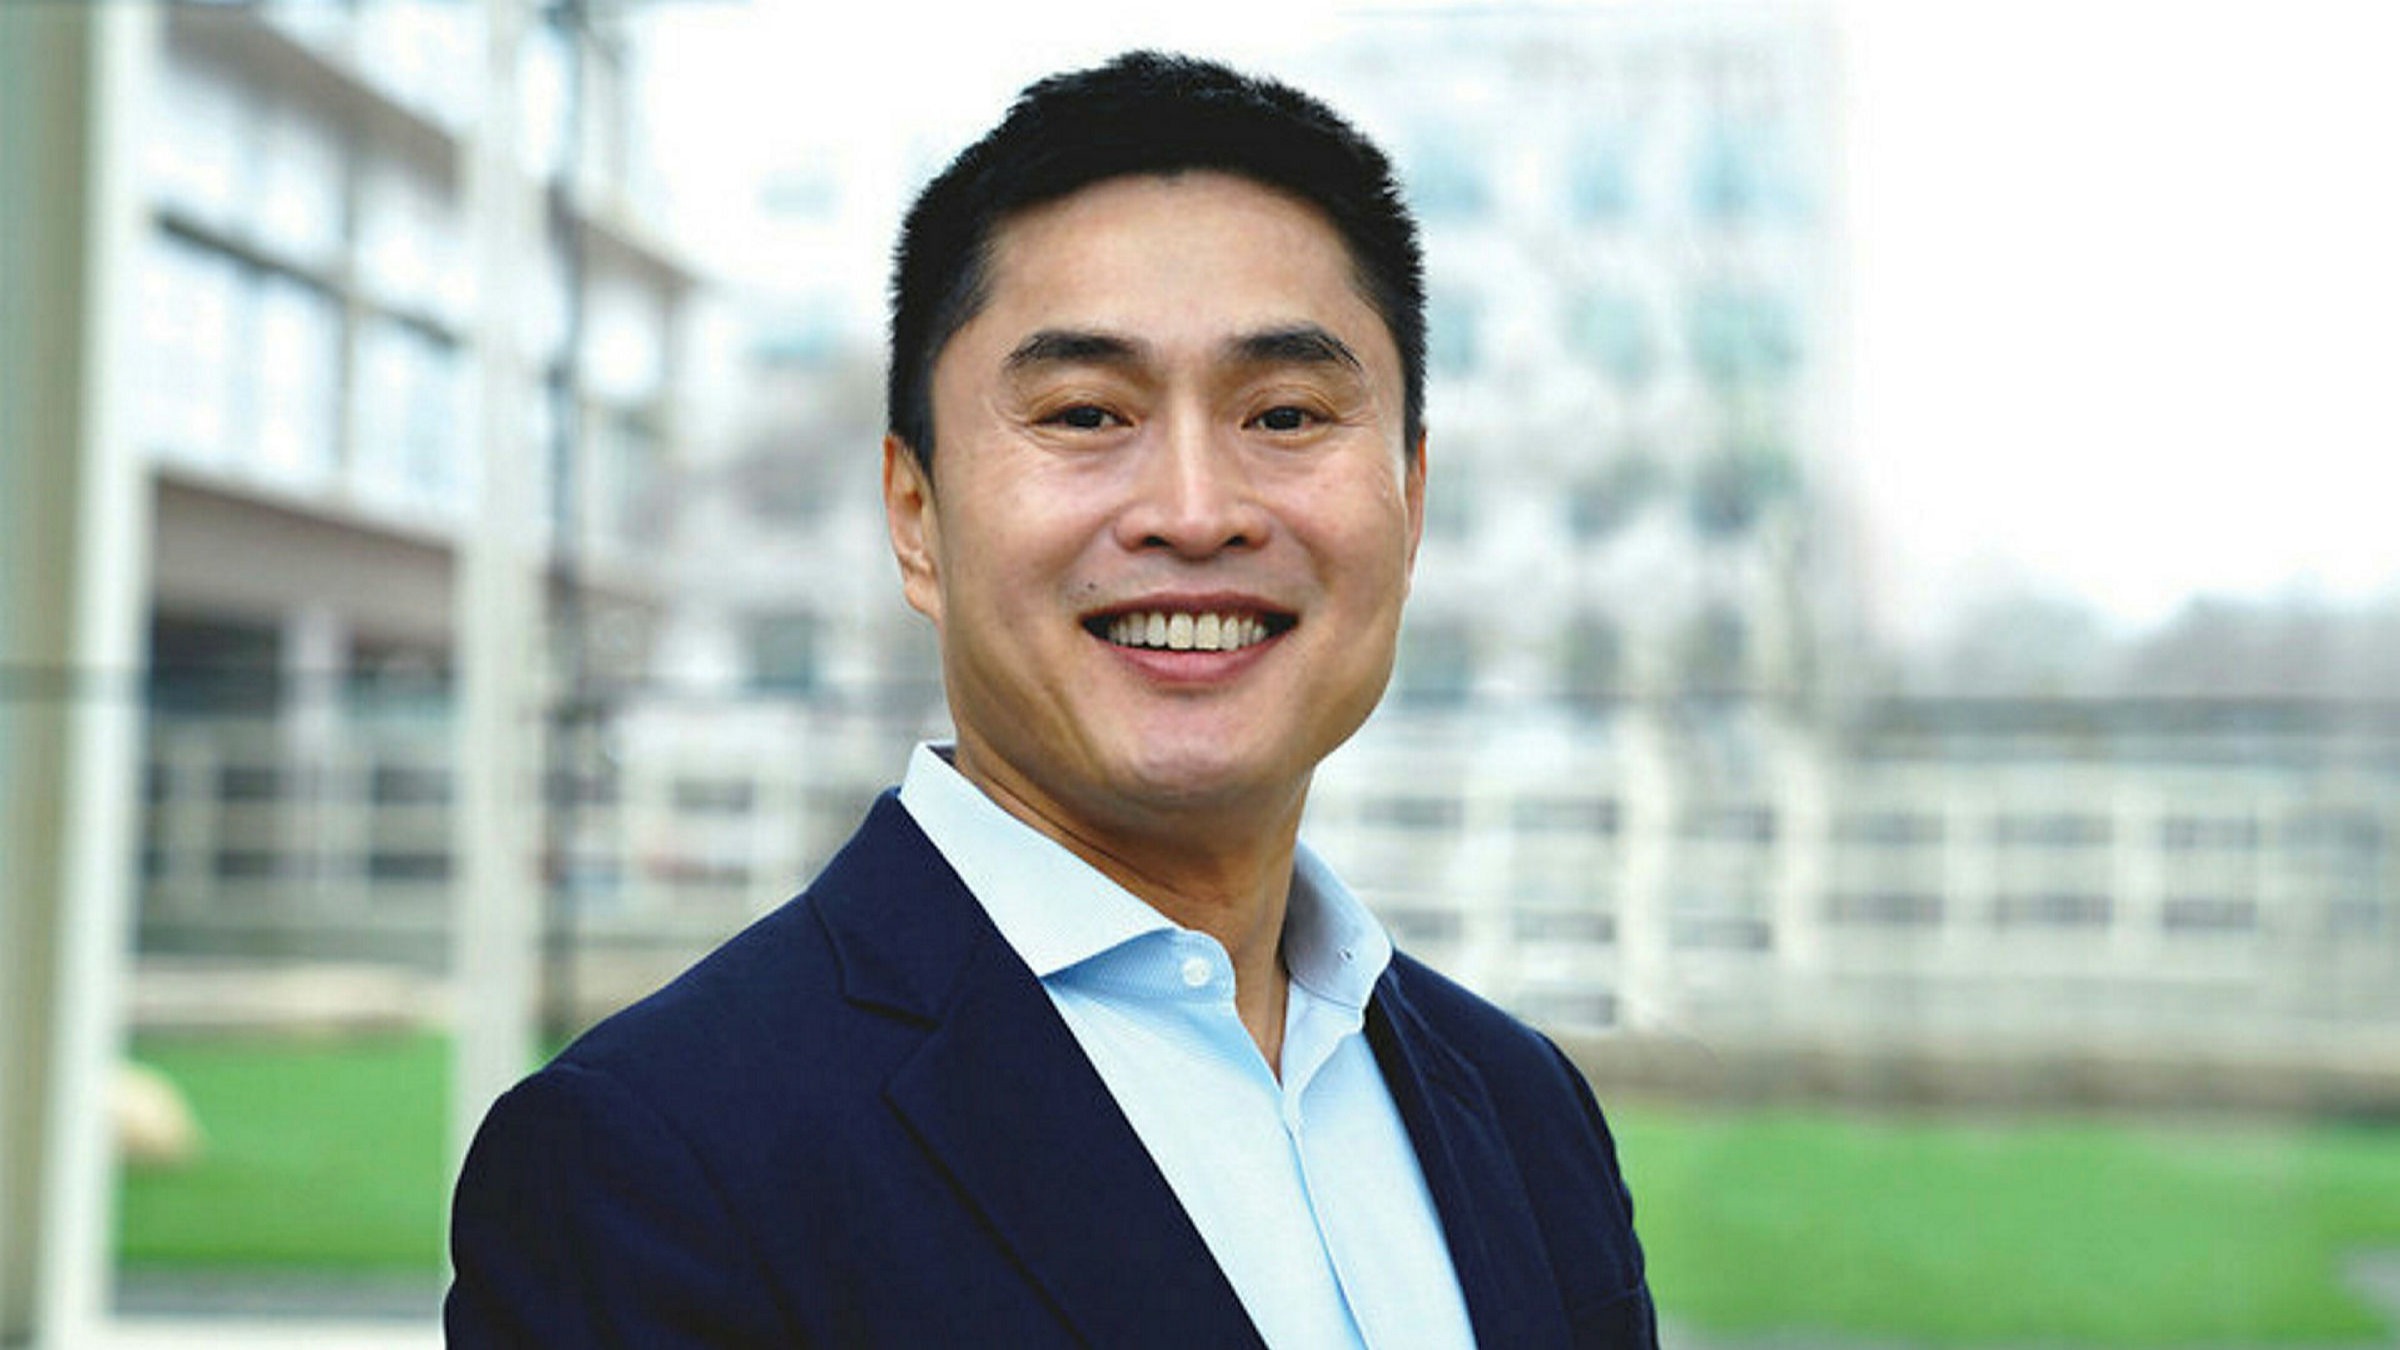 Ben Meng was appointed to the role in January 2019 and pushed to increase the fund’s borrowing to meet ambitious performance targets